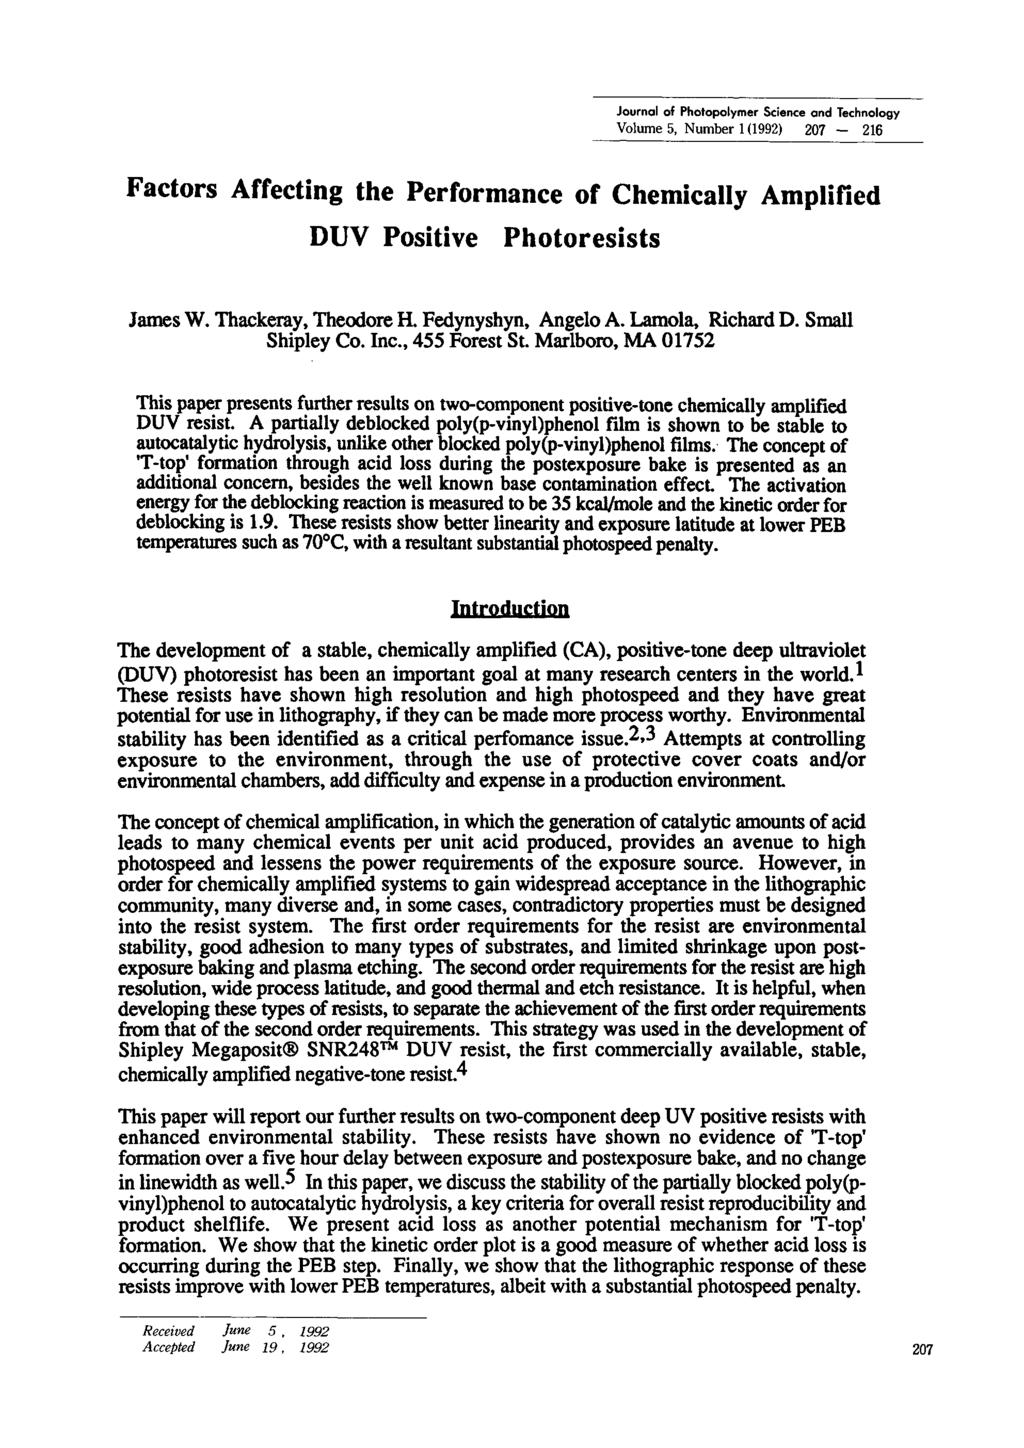 Journal of Photopolymer Science and Technology Volume 5, Number 1(1992) 207-216 Factors Affecting the Performance of Chemically DUV Positive Photoresists Amplified James W. Thackeray, Theodore H.